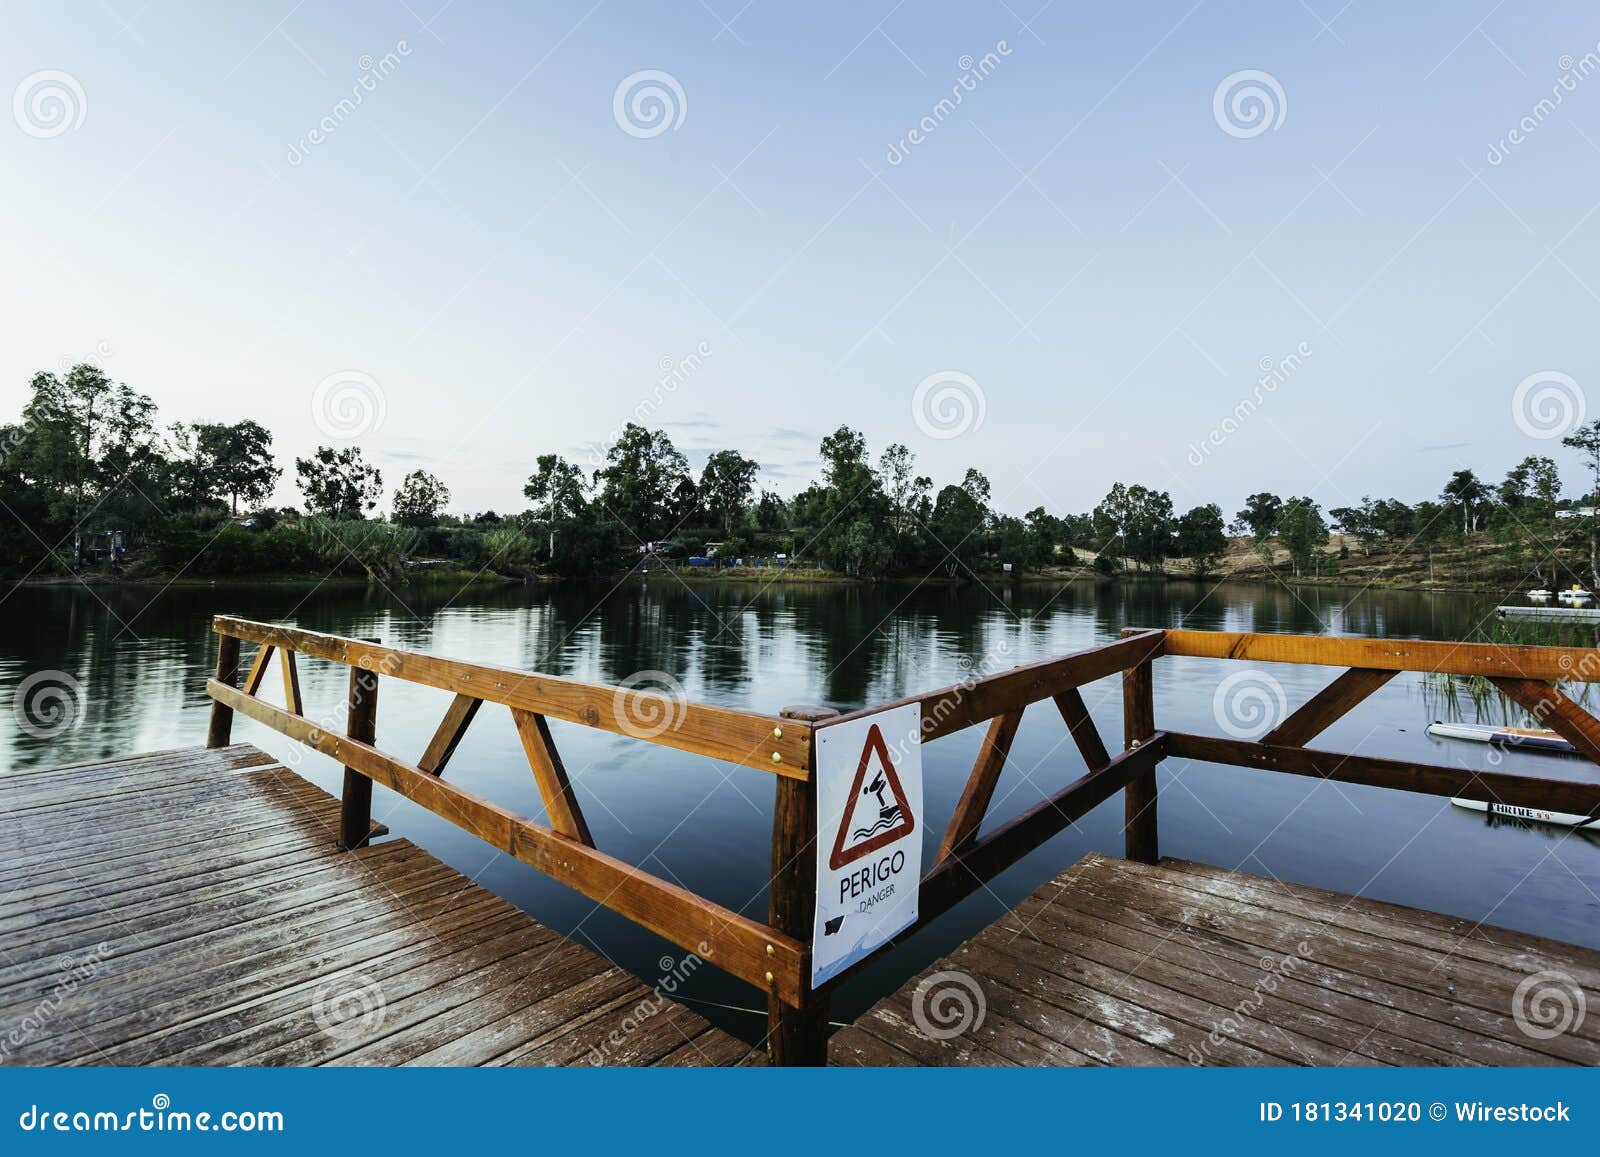 wooden dock with a [perigo - danger] sign on a lake under a blue sky and sunlight at daytime